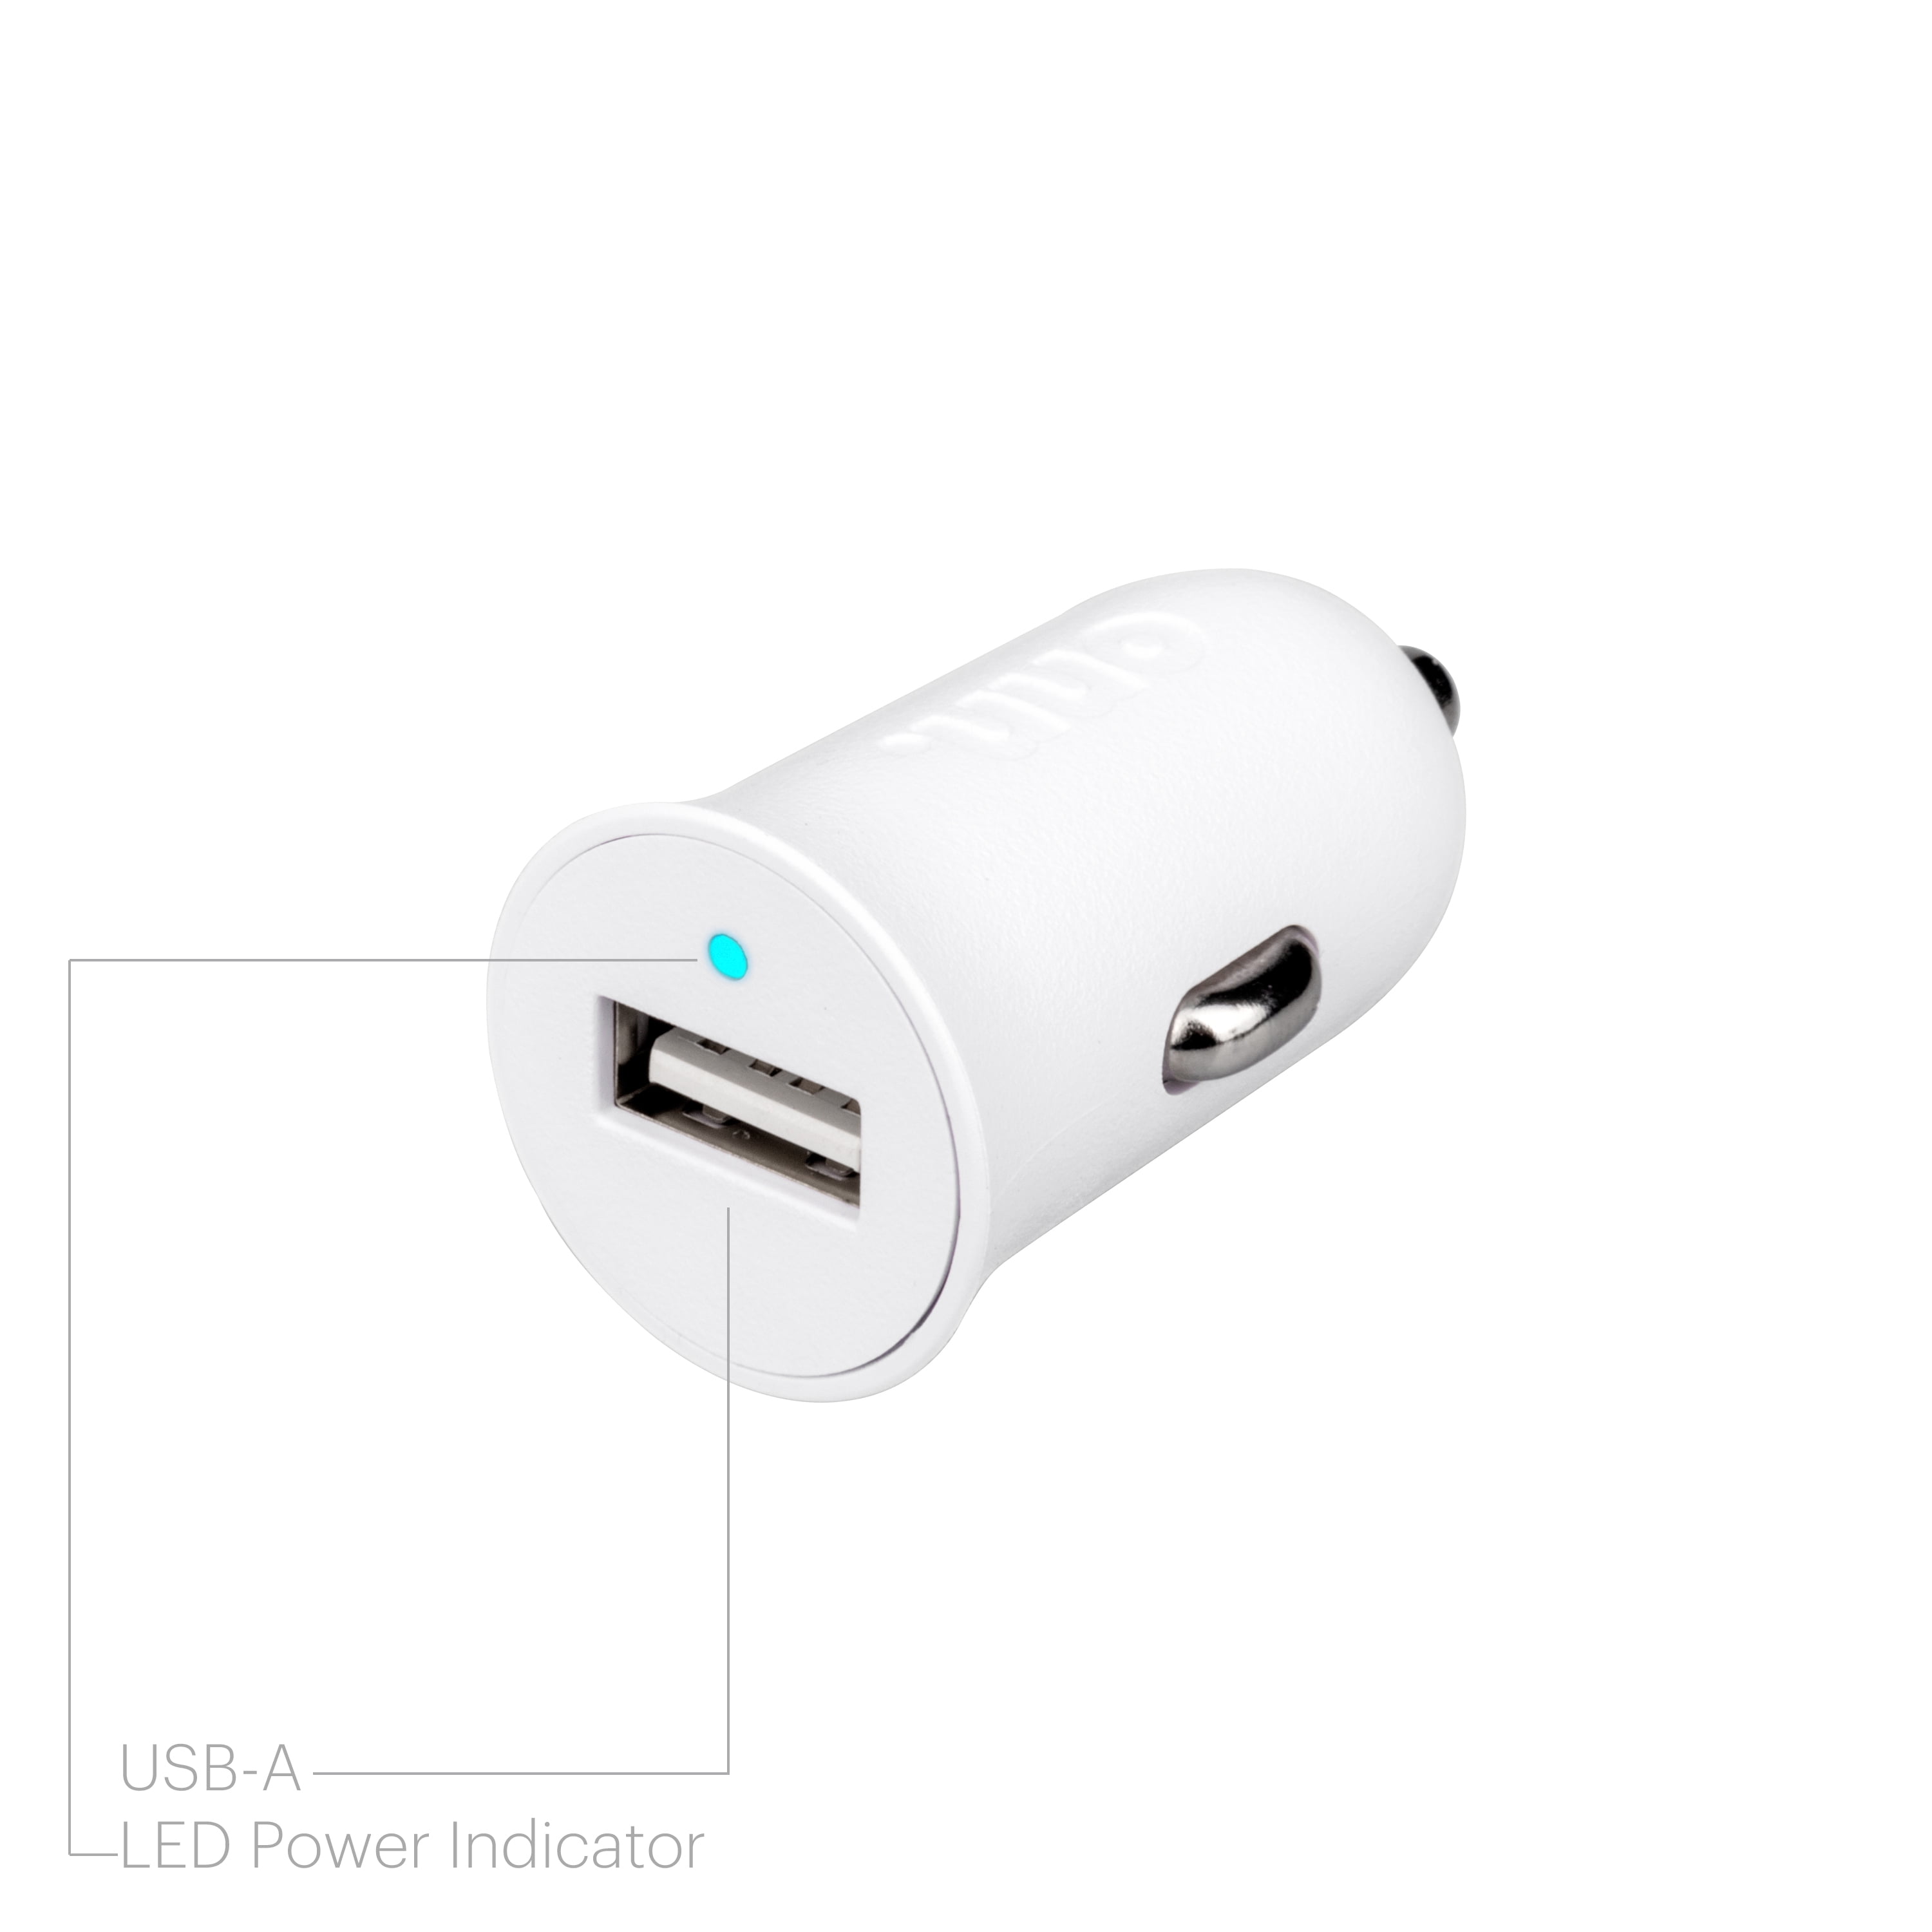 onn. 12W Universal Car Charger, White,Charge all USB-powered devices including iPhone, Android phones, tablets, dash cams, Bluetooth headphones & speakers, e-readers, smartwatches, and more